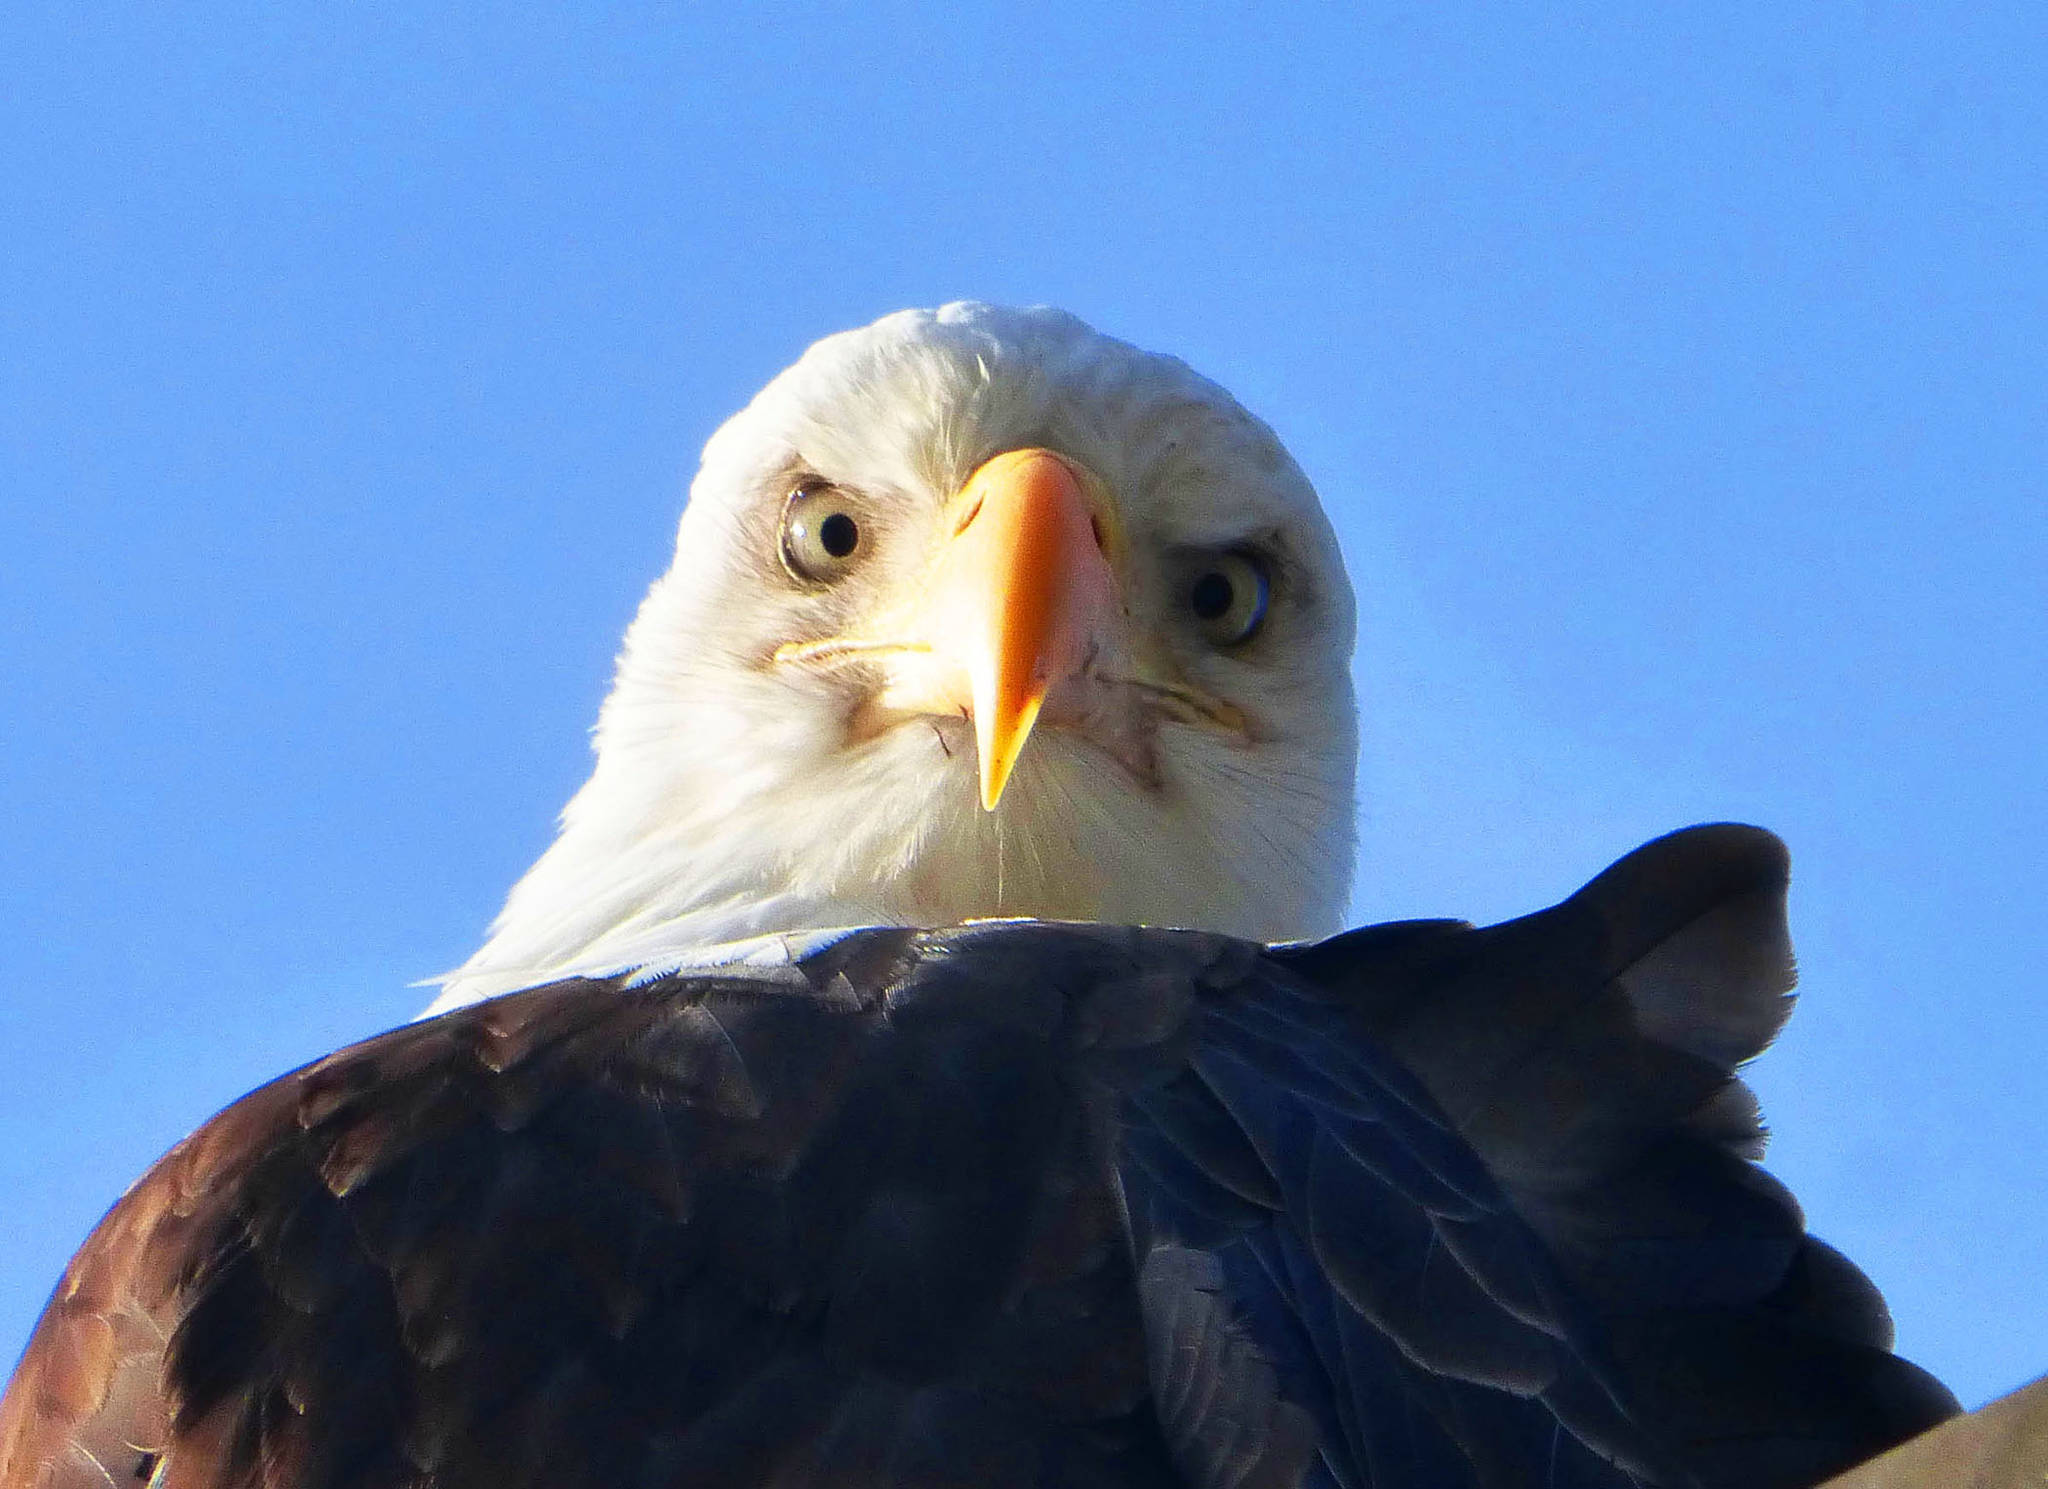 Here’s looking at you! An eagle at C Dock in the downtown boat harbor on March 27. (Photo by Denise Carroll)